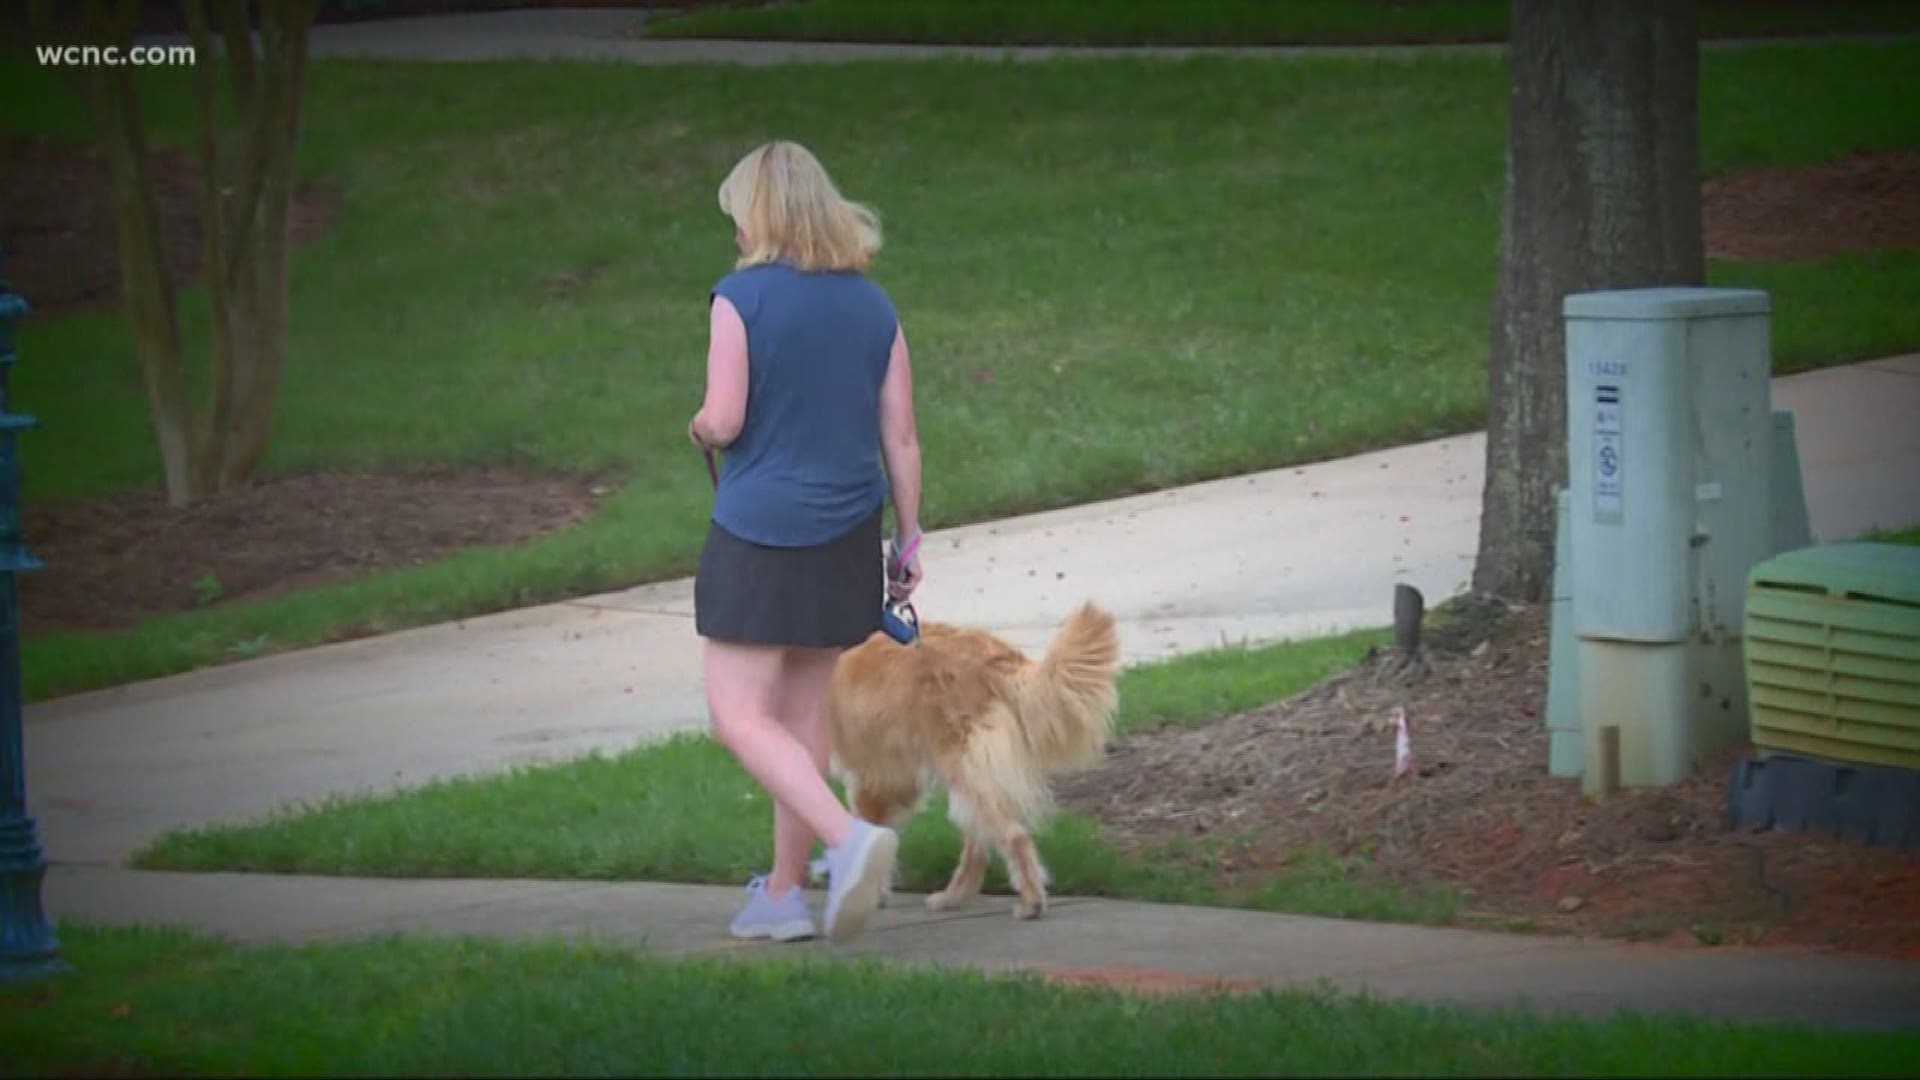 Neighbors in Ballantyne are being urged to call police if they see anything suspicious after a woman who was walking her dog had a strange encounter with a man.